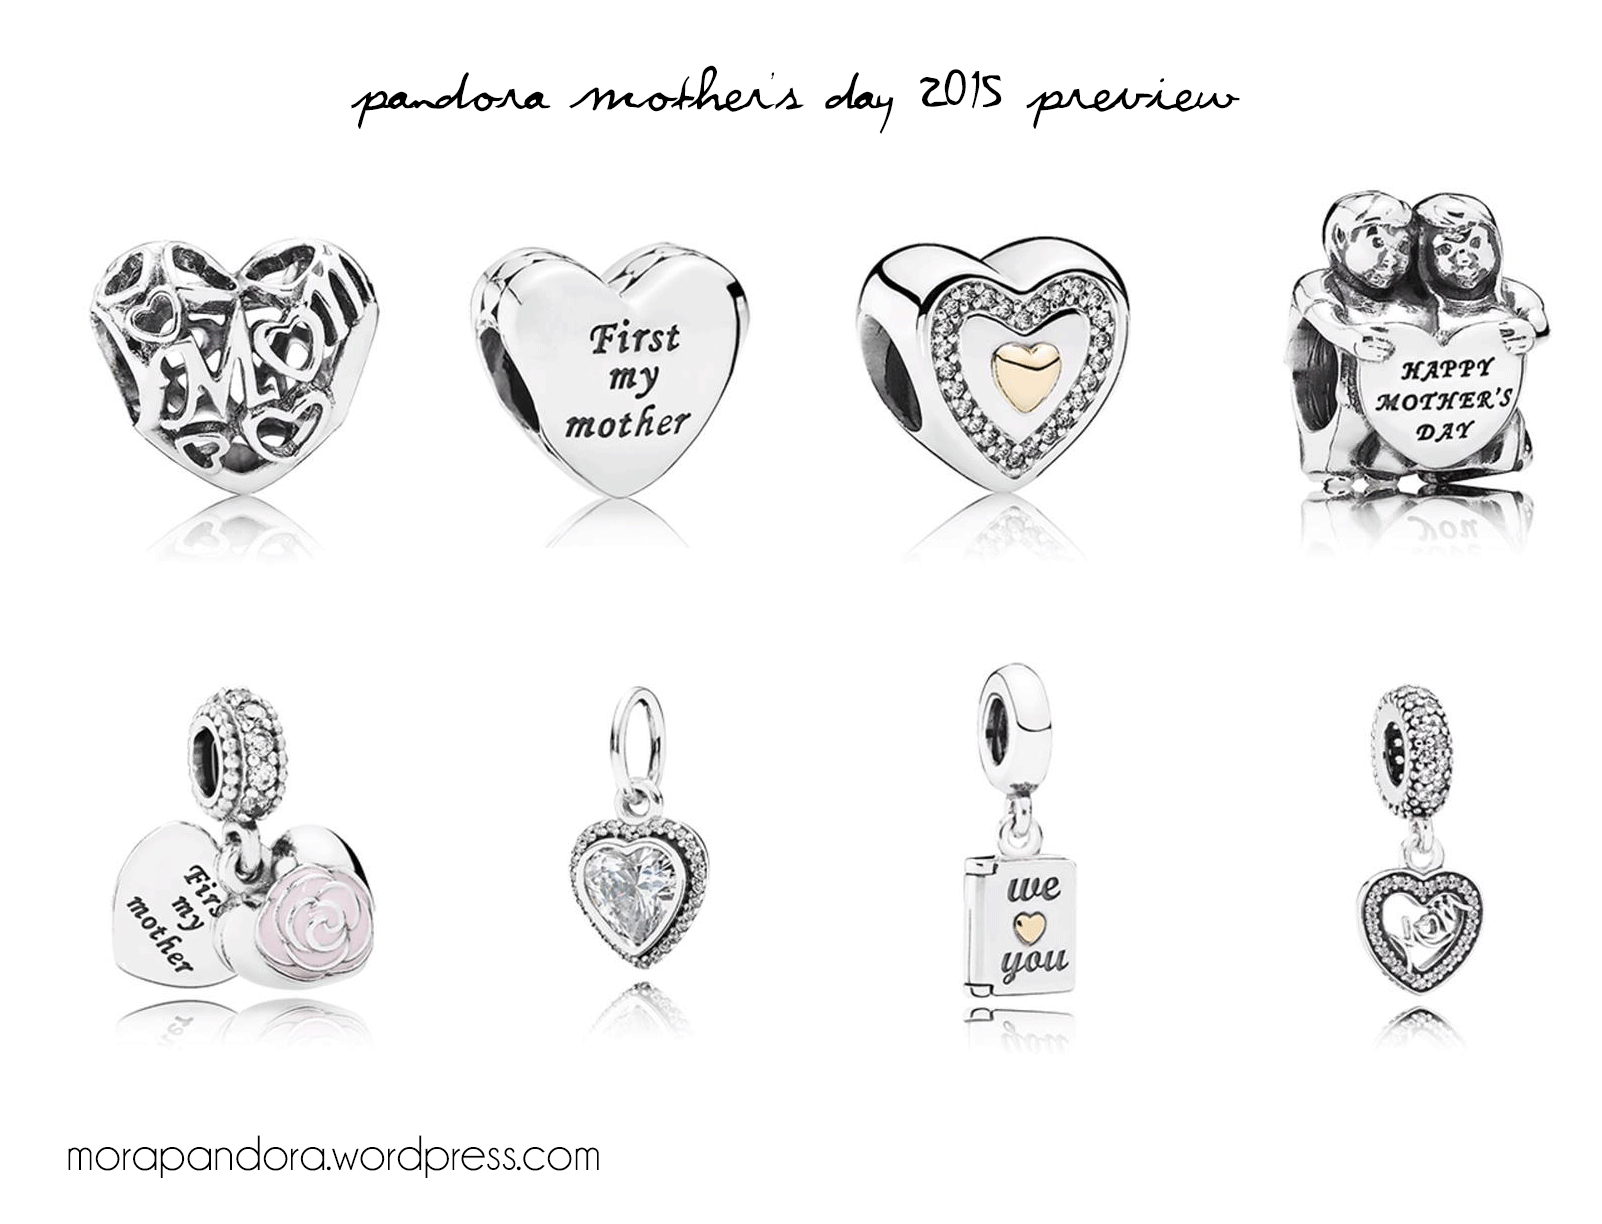 pandora mother's day 2015 collection